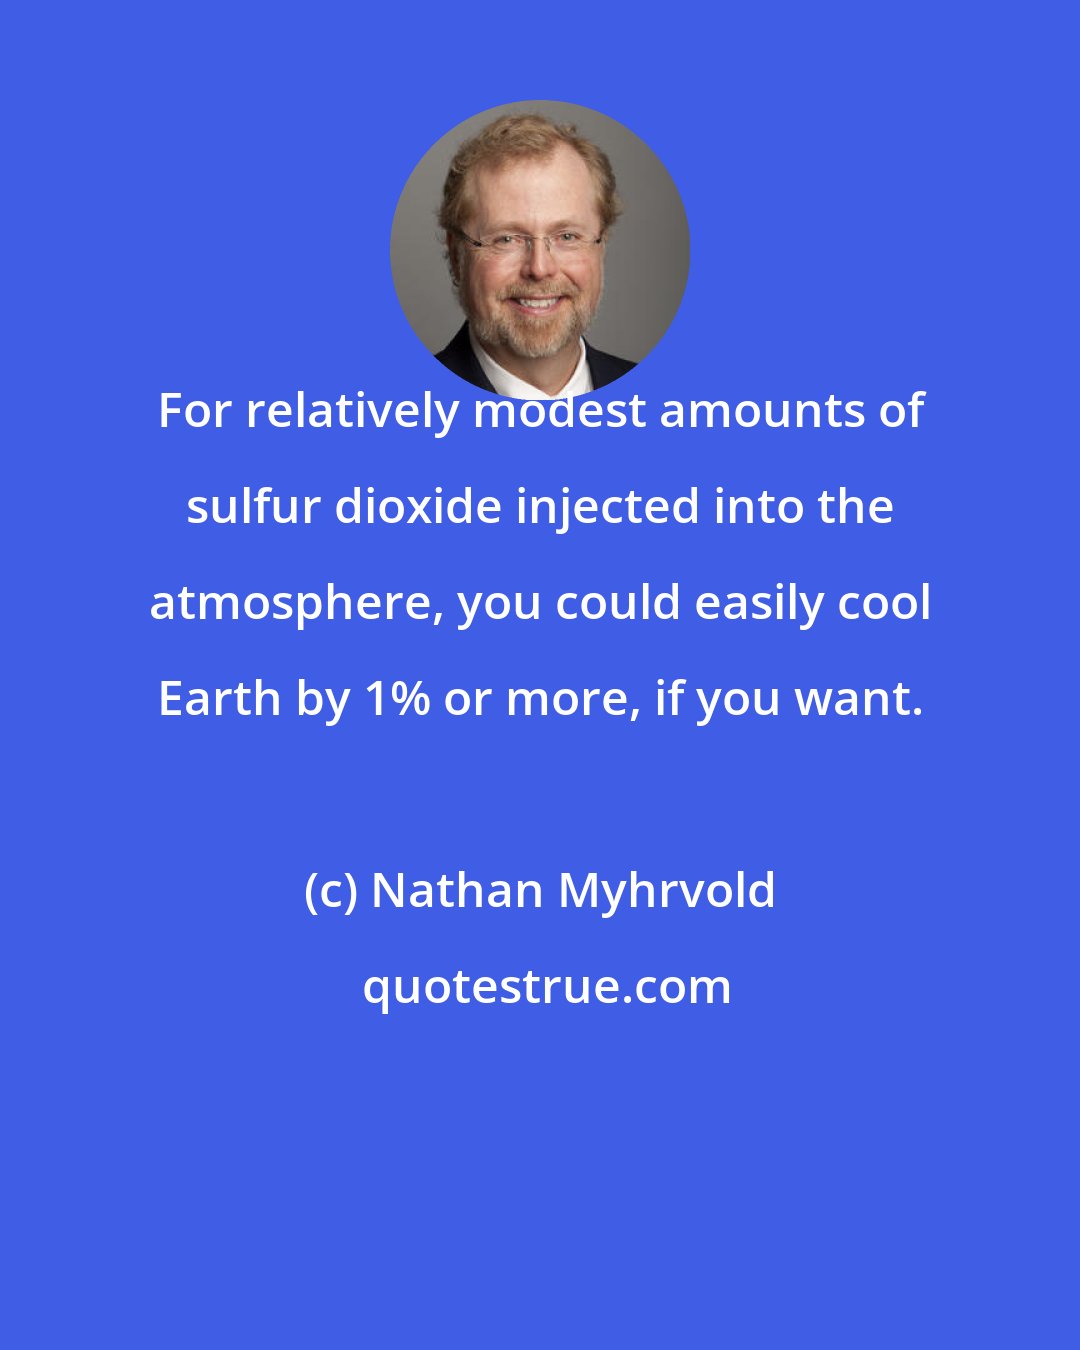 Nathan Myhrvold: For relatively modest amounts of sulfur dioxide injected into the atmosphere, you could easily cool Earth by 1% or more, if you want.